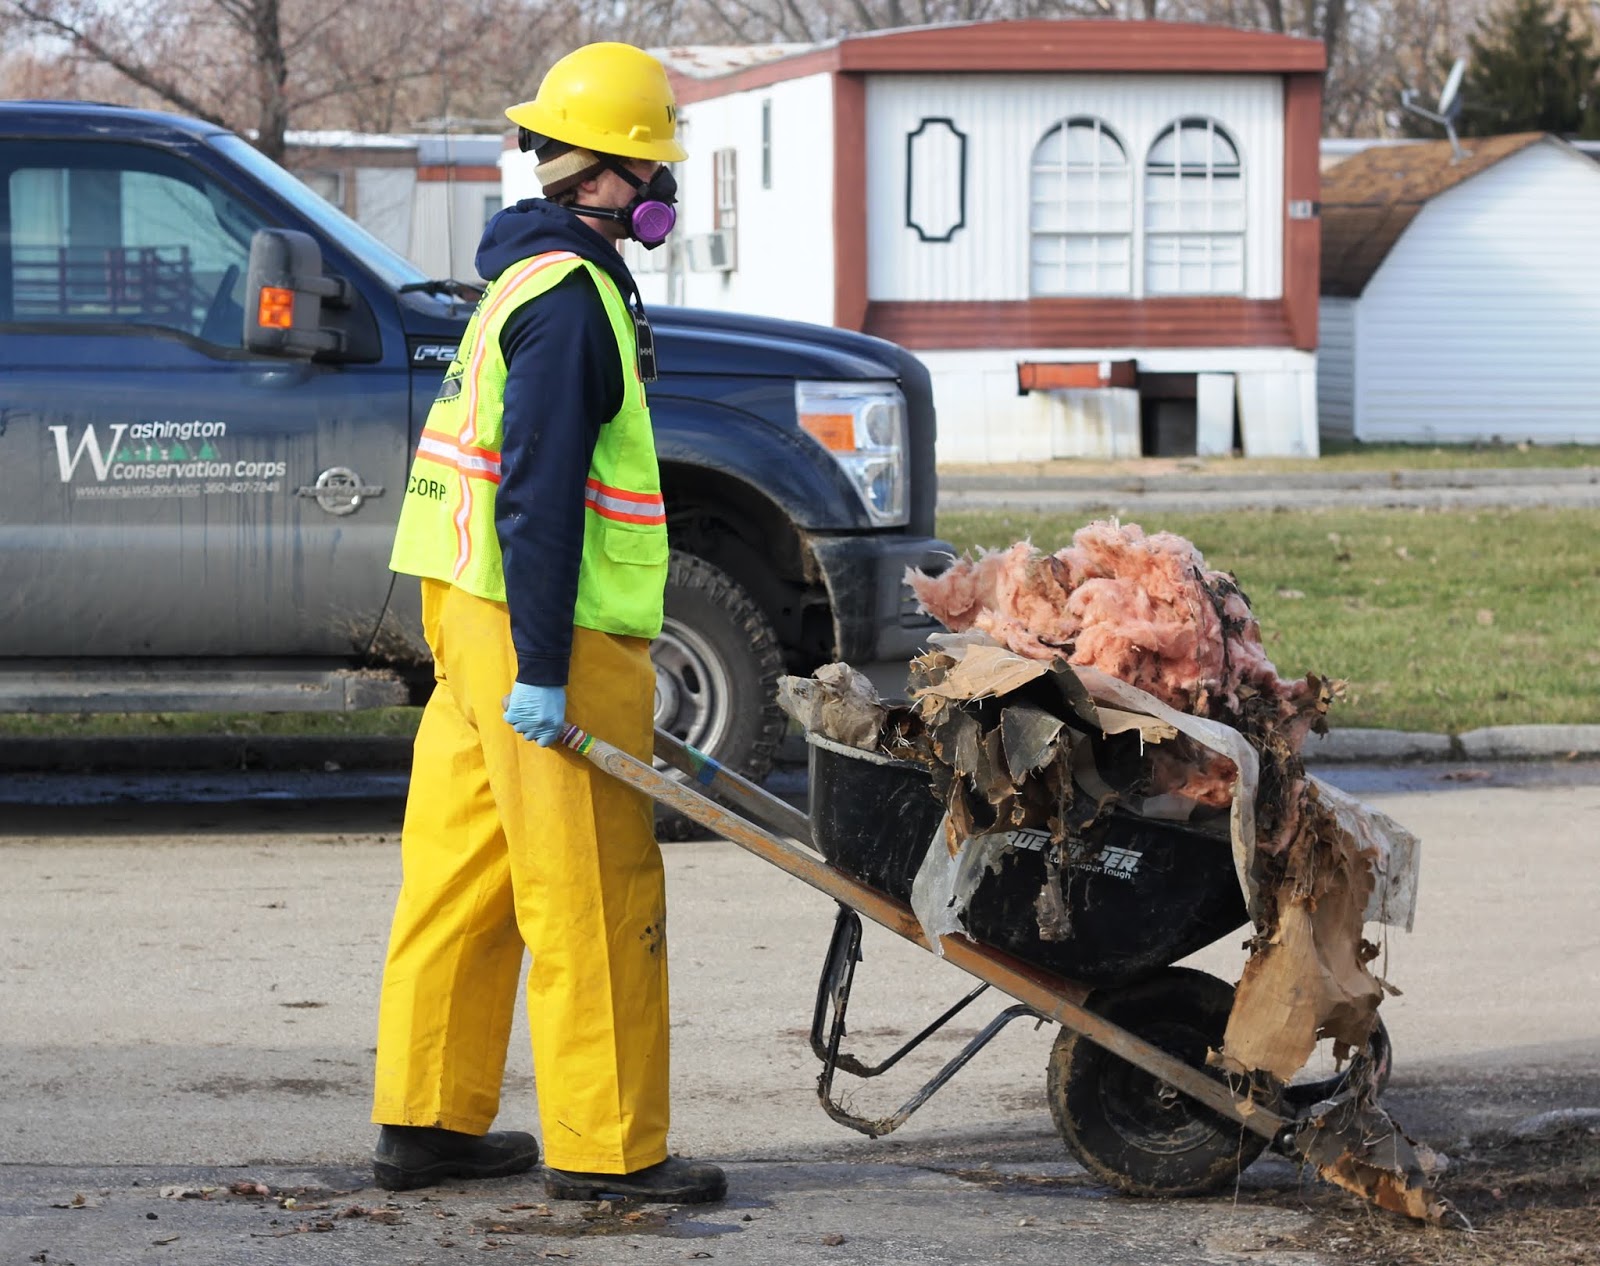 A WCC AmeriCorps member carries a wheelbarrow full of debris. They are wearing a yellow hard hat, respirator mask, and yellow pants & vest.